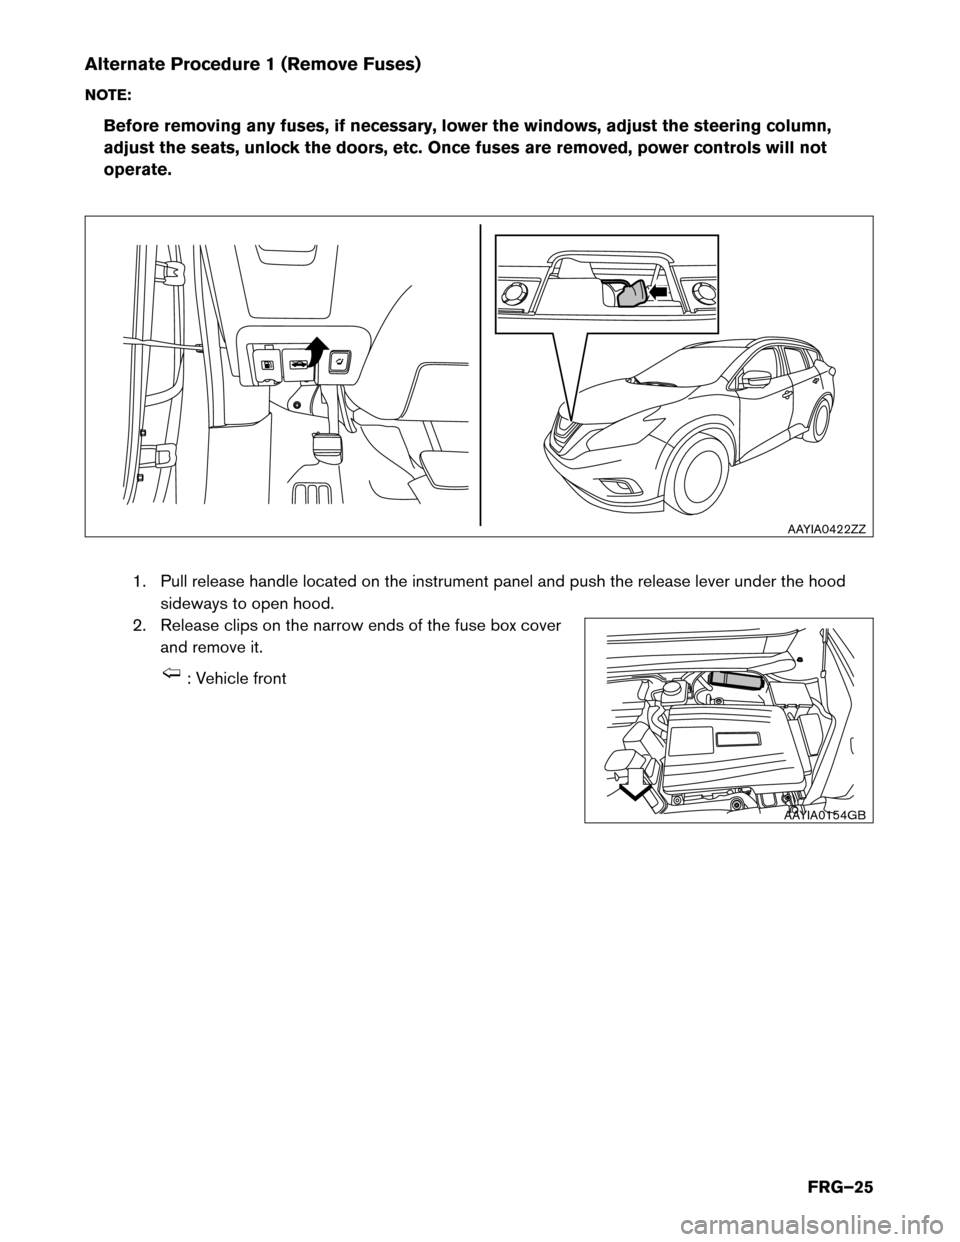 NISSAN MURANO HYBRID 2016 3.G First Responders Guide Alternate Procedure 1 (Remove Fuses)
NO
TE:
Before removing any fuses, if necessary, lower the windows, adjust the steering column,
adjust the seats, unlock the doors, etc. Once fuses are removed, pow